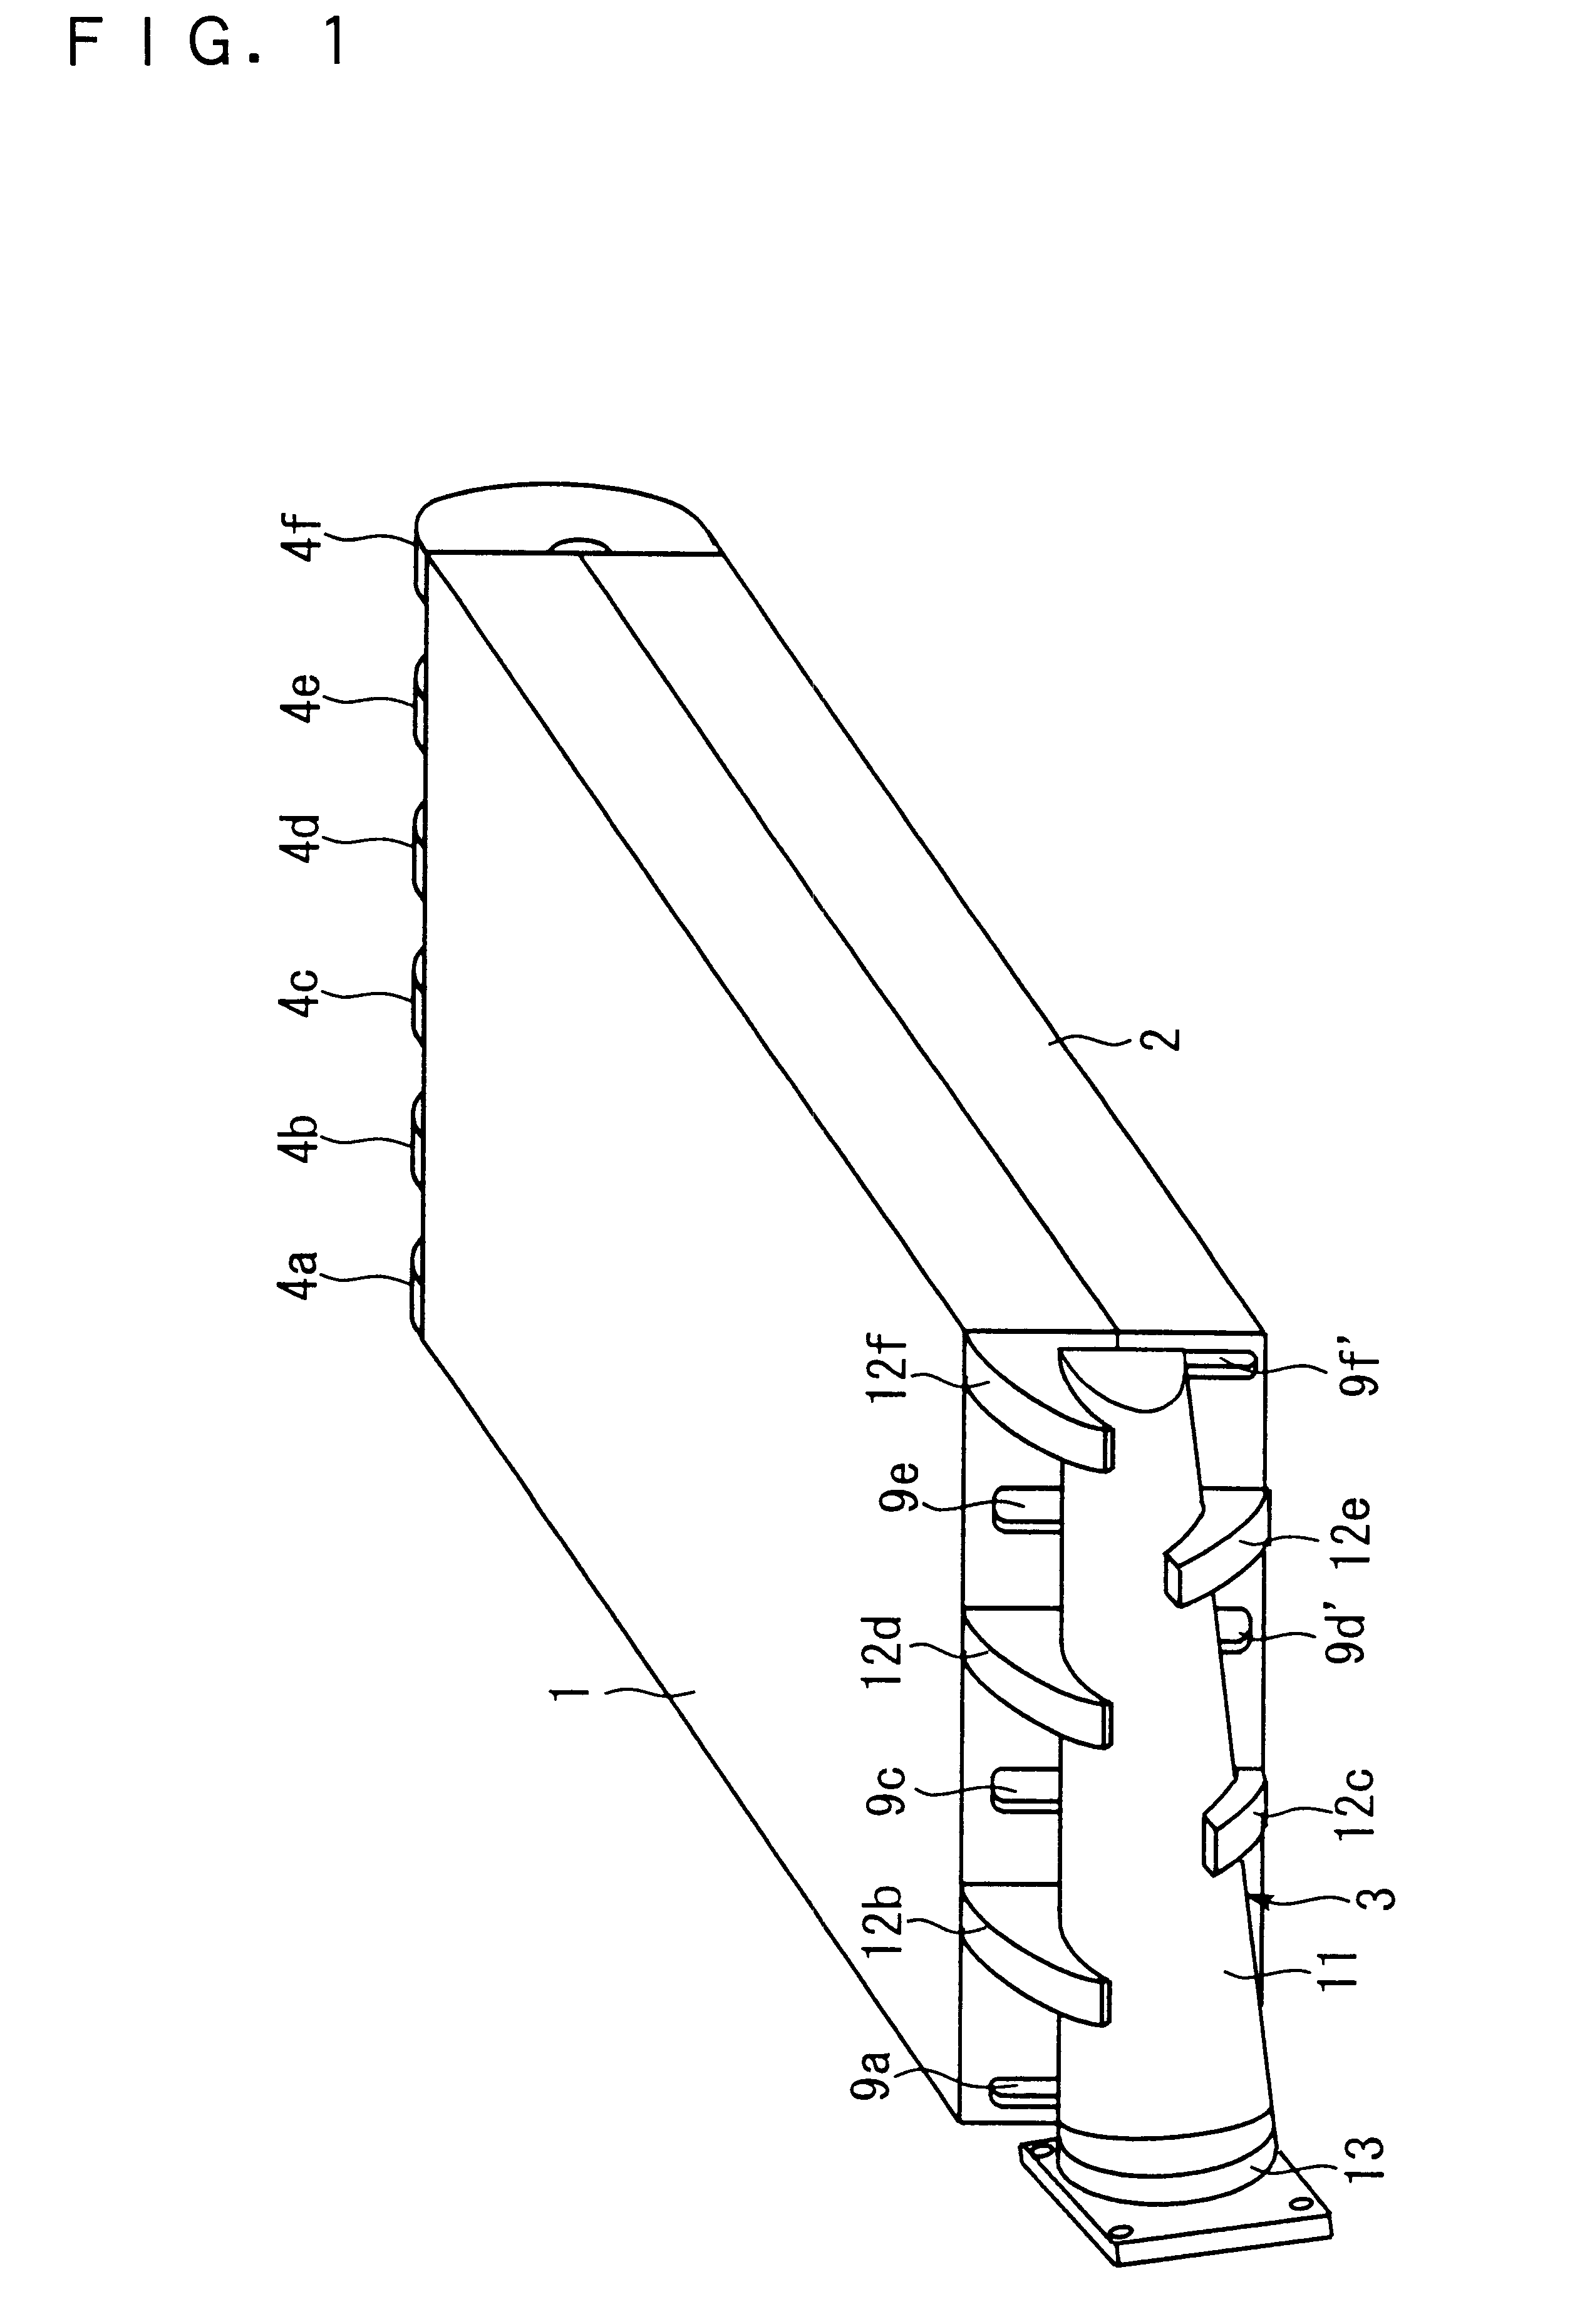 Battery cooling structure